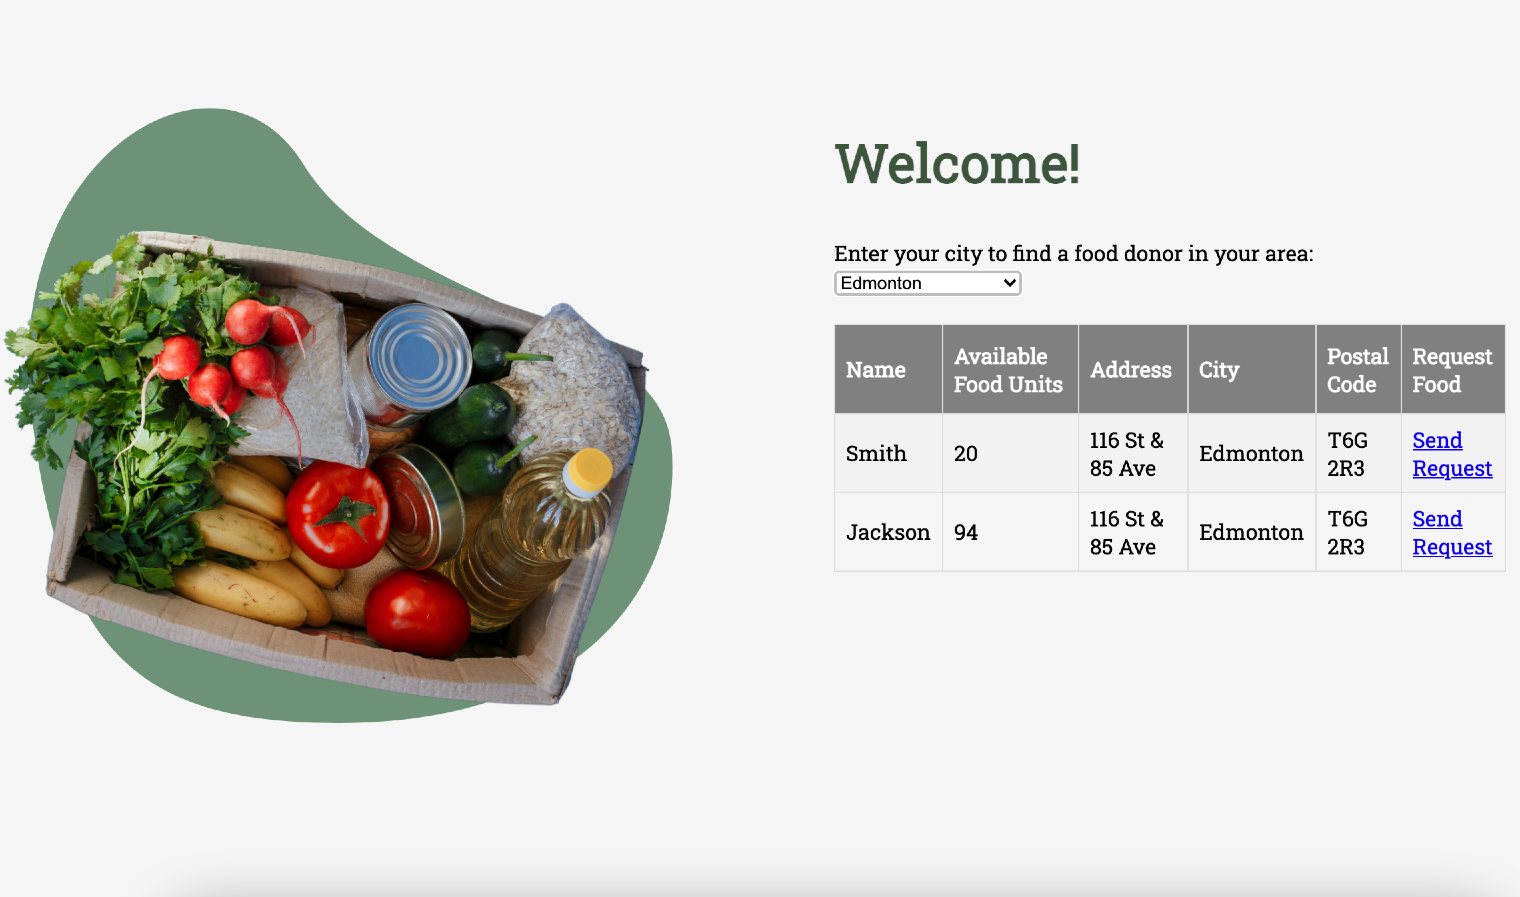 Hackathons are common in the world of tech and software development, where teams come together to tackle a common problem. Here, students in CMPUT 401 have created a web app that can help coordinate donations of unused food.